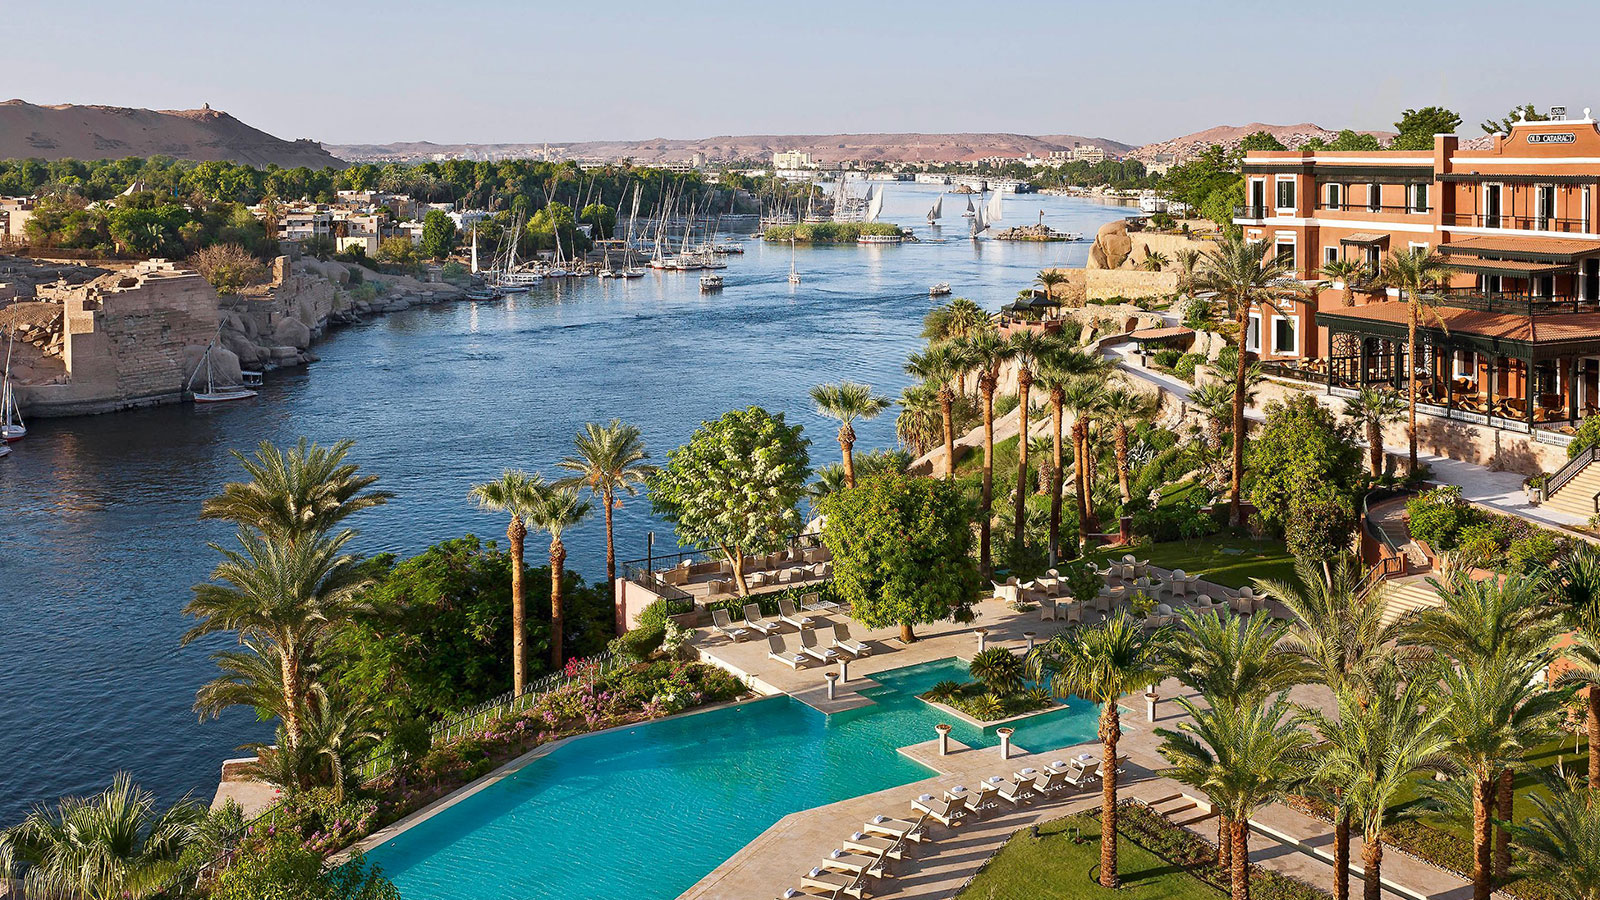 Discover the great Nile River just beyond this brilliant destination.